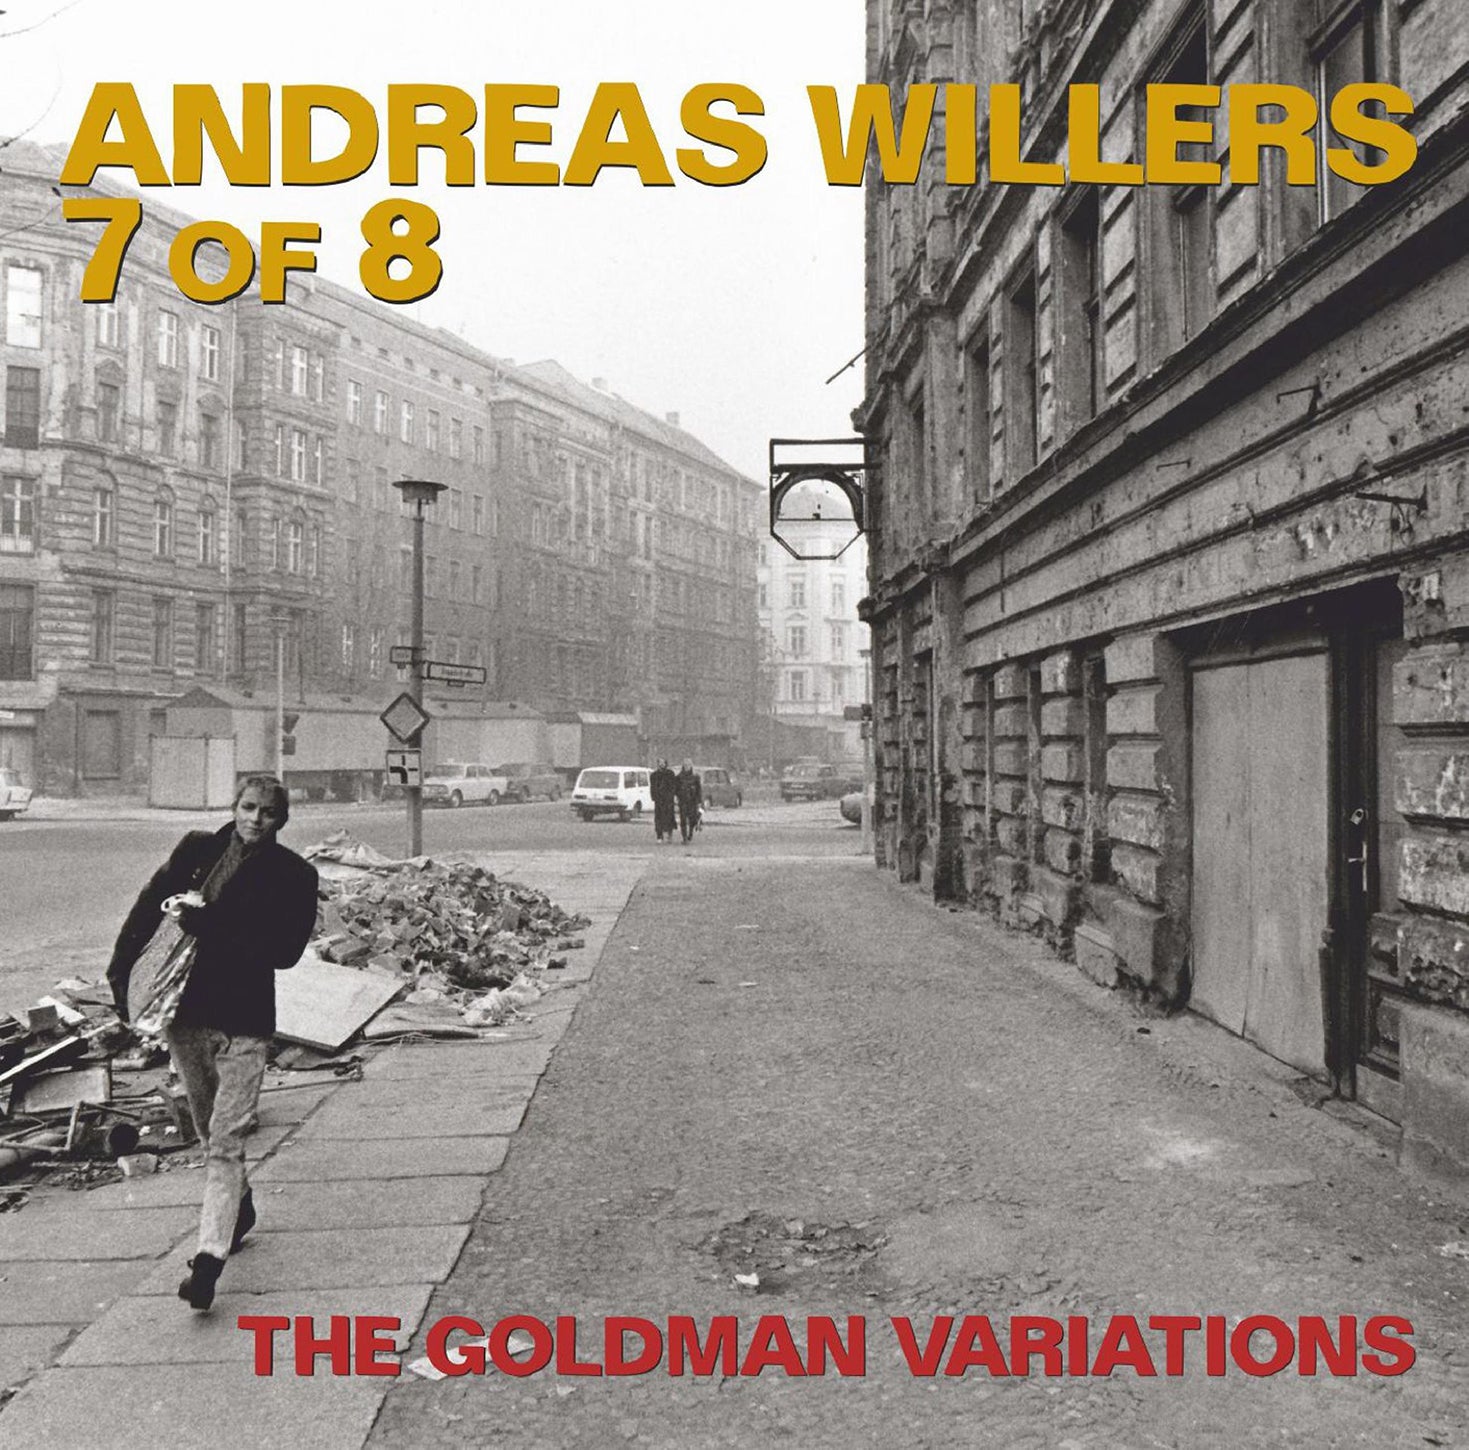 The Goldman Variations / Andreas Willers Septet